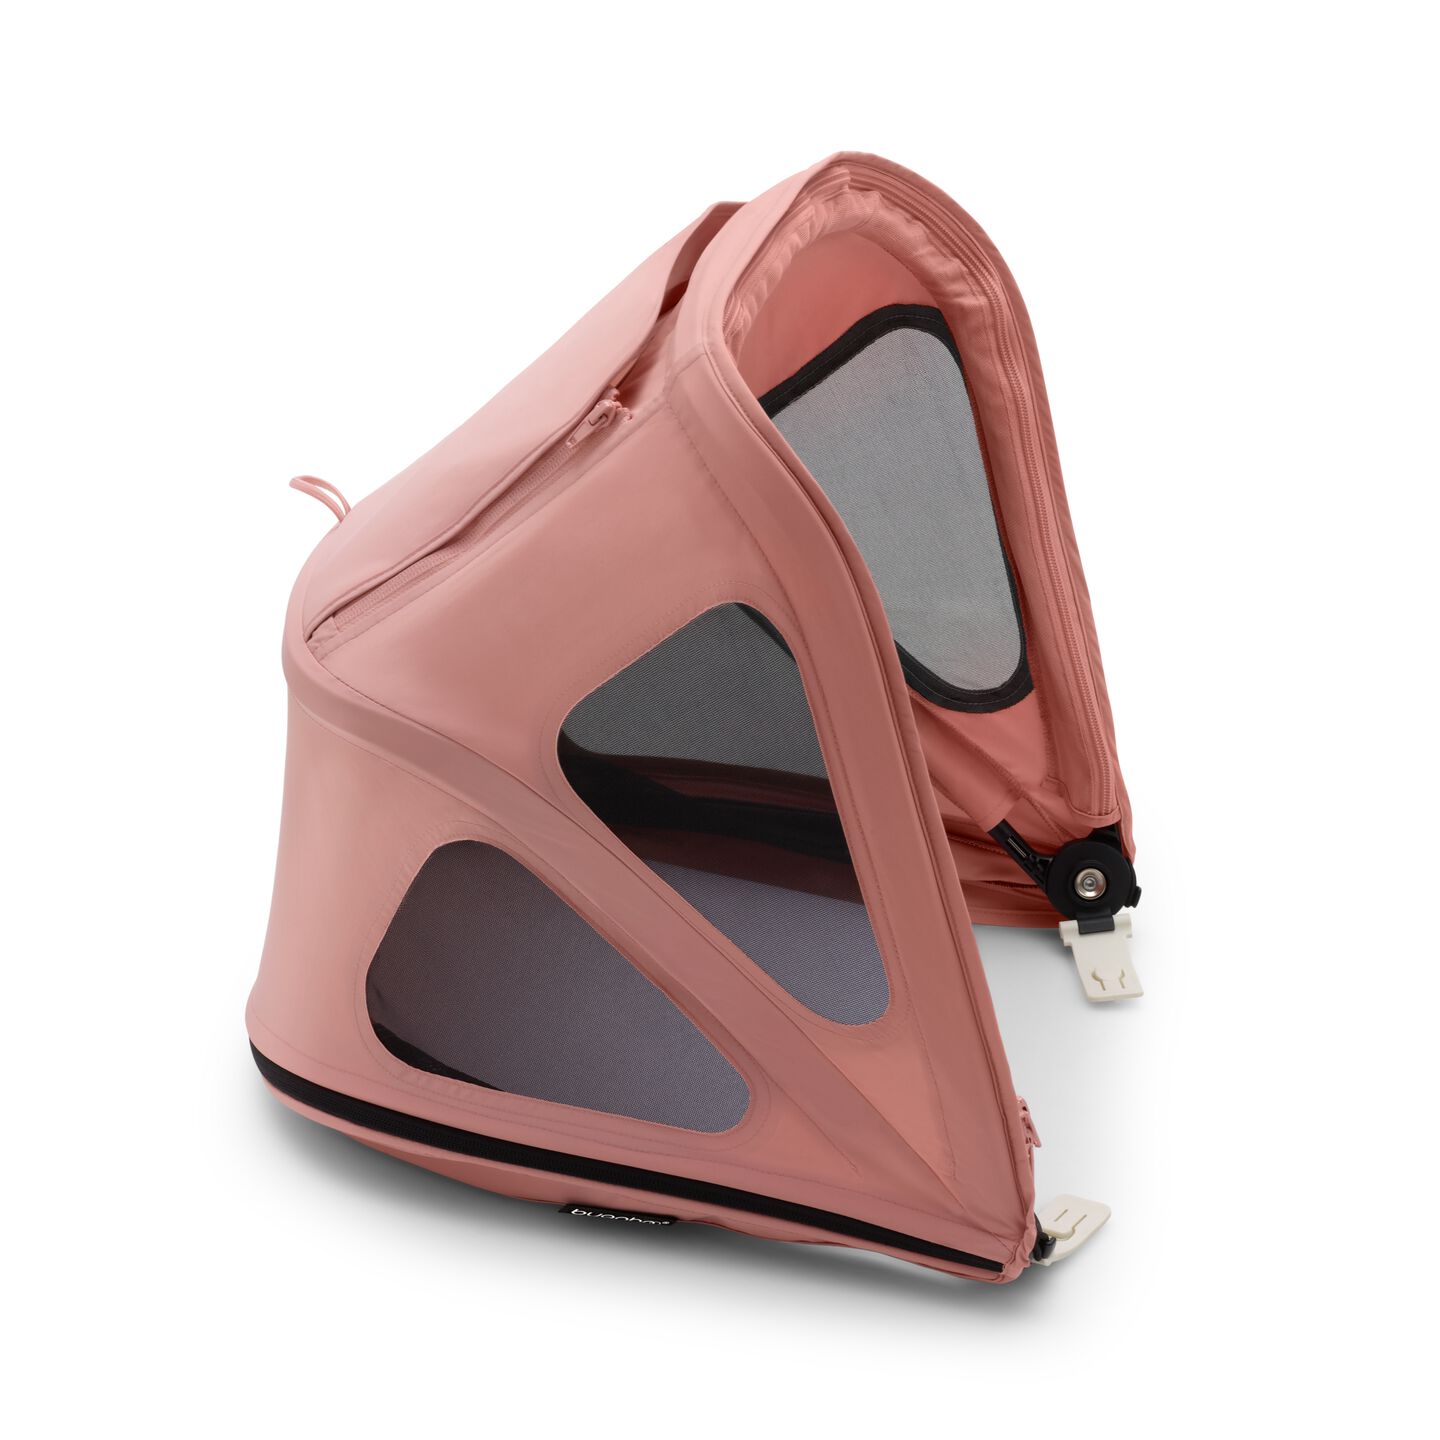 /ficheros/productos/s001264001_bee_breezy_sun_canopy_morning_pink.jpg